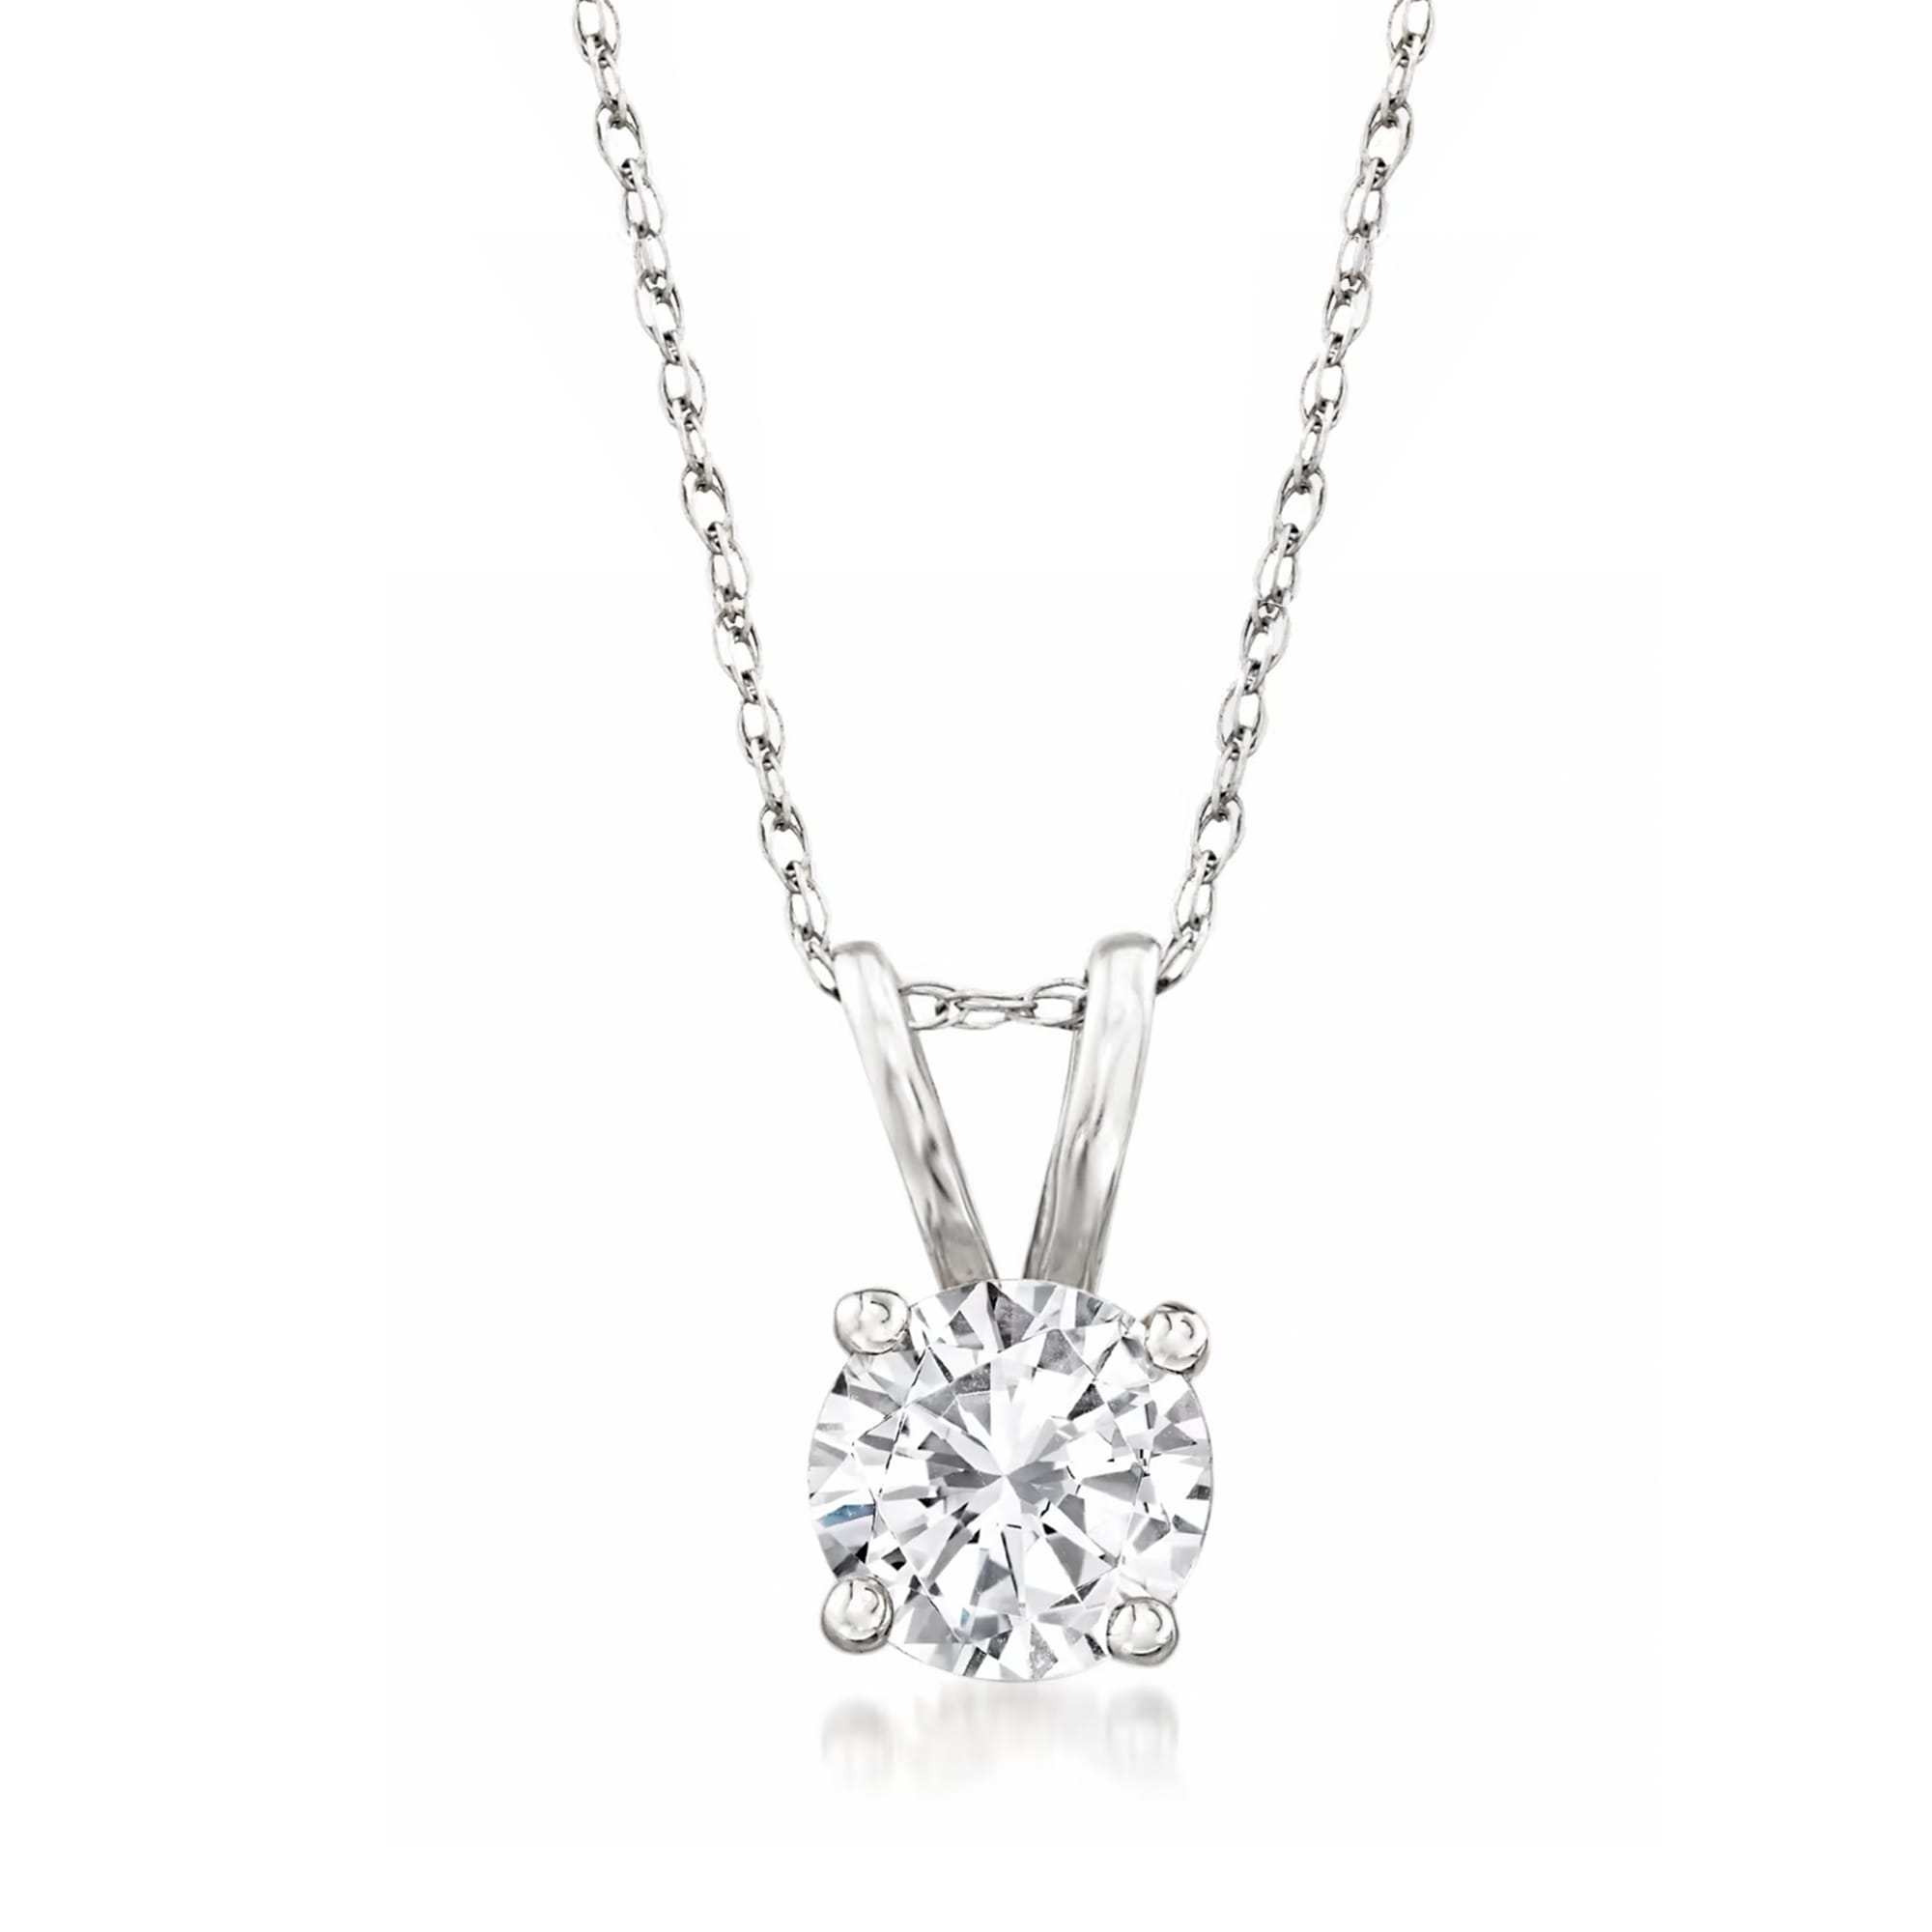 .75 Carat Diamond Solitaire Necklace in 14kt White Gold | Ross-Simons